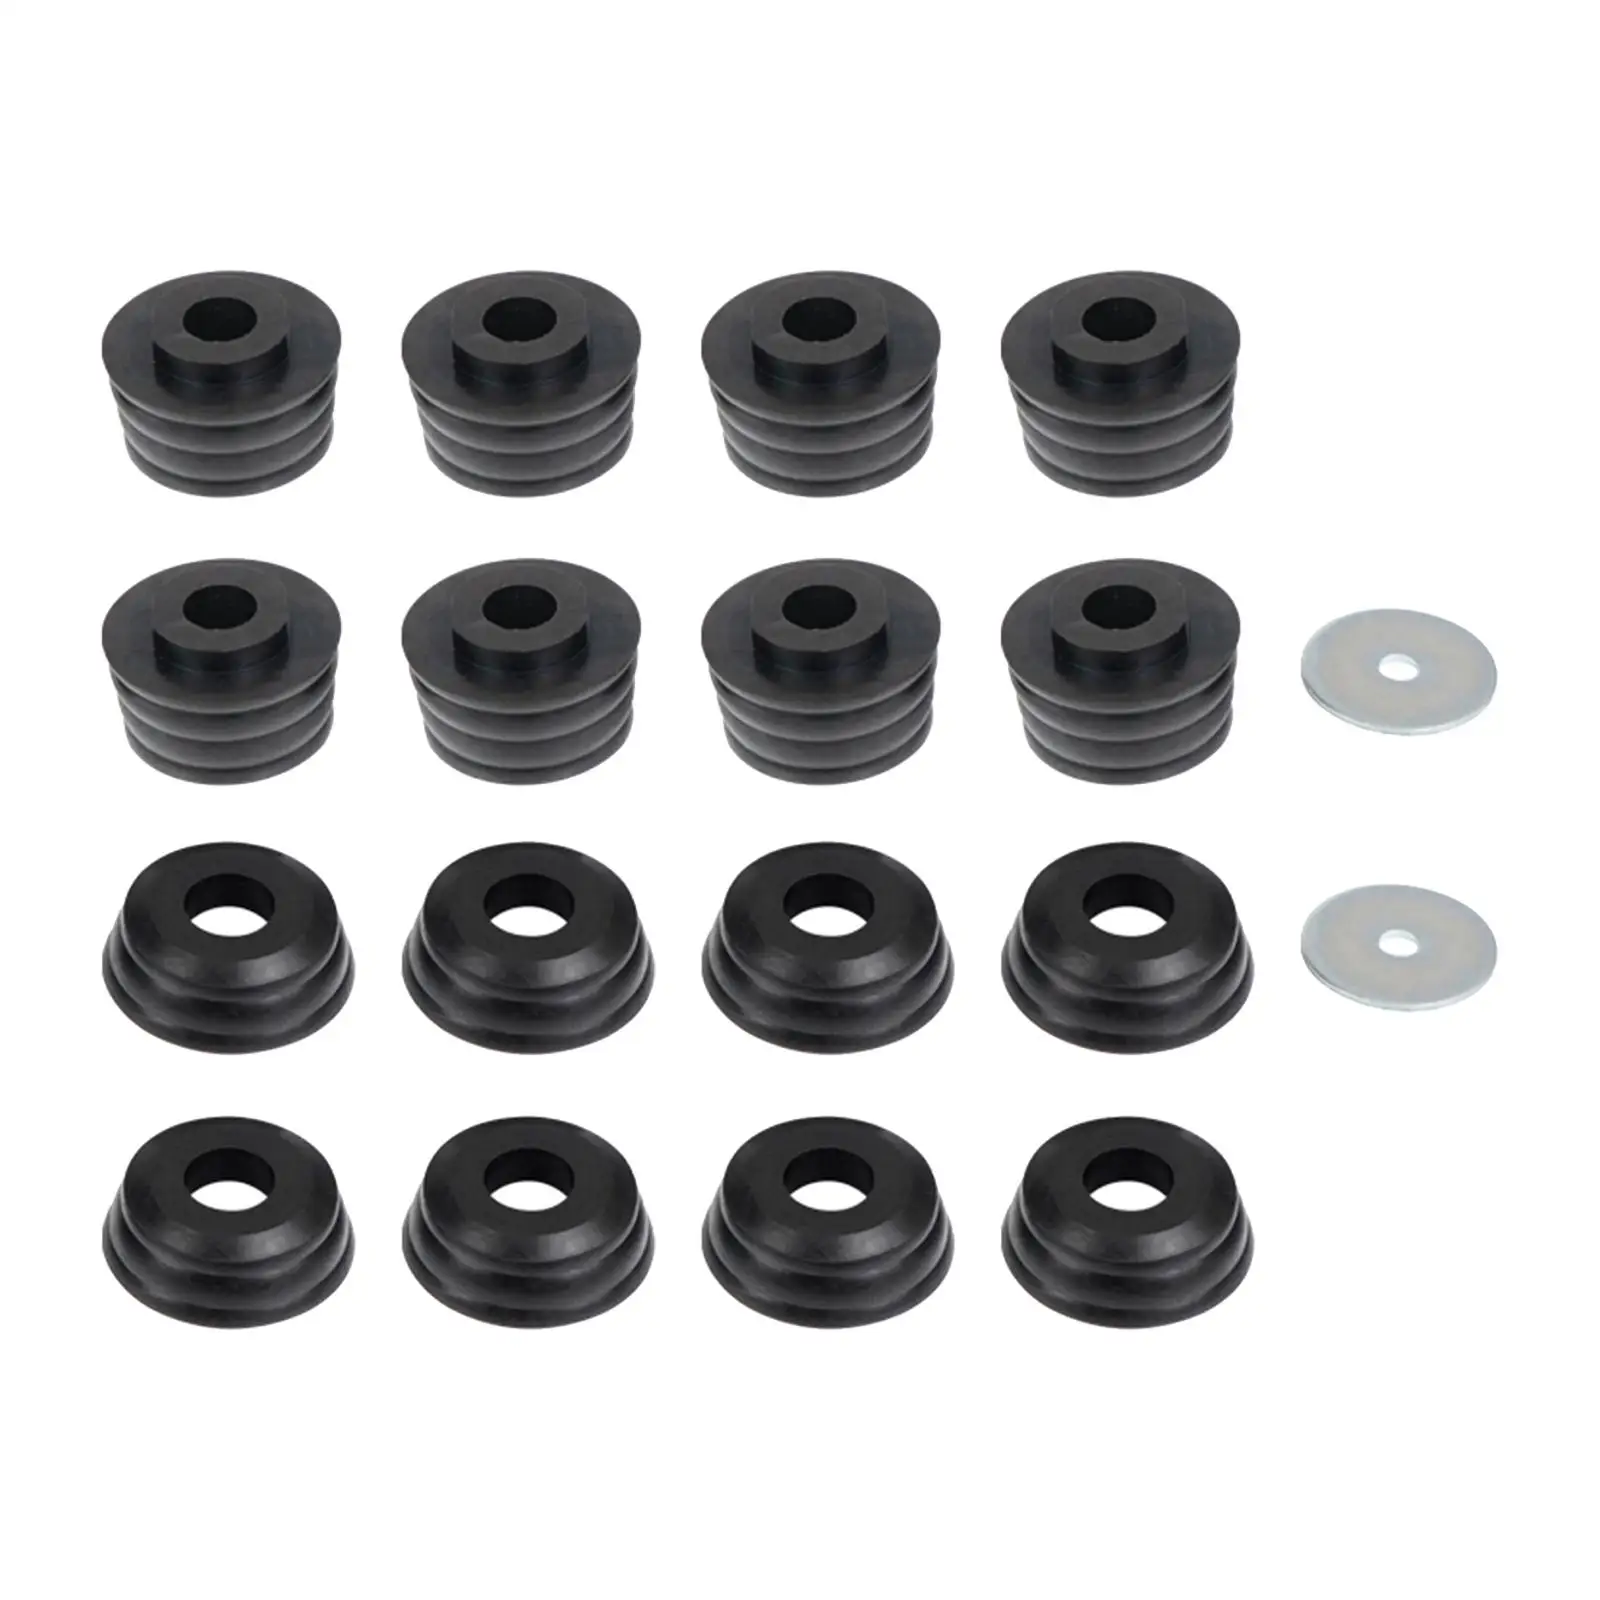 

Body Cab Bushing Kit Easy Installation Spare Parts Black Body Cab Mounts Washers for GMC Sierra 2WD 4WD 1999-2014 1500 2500